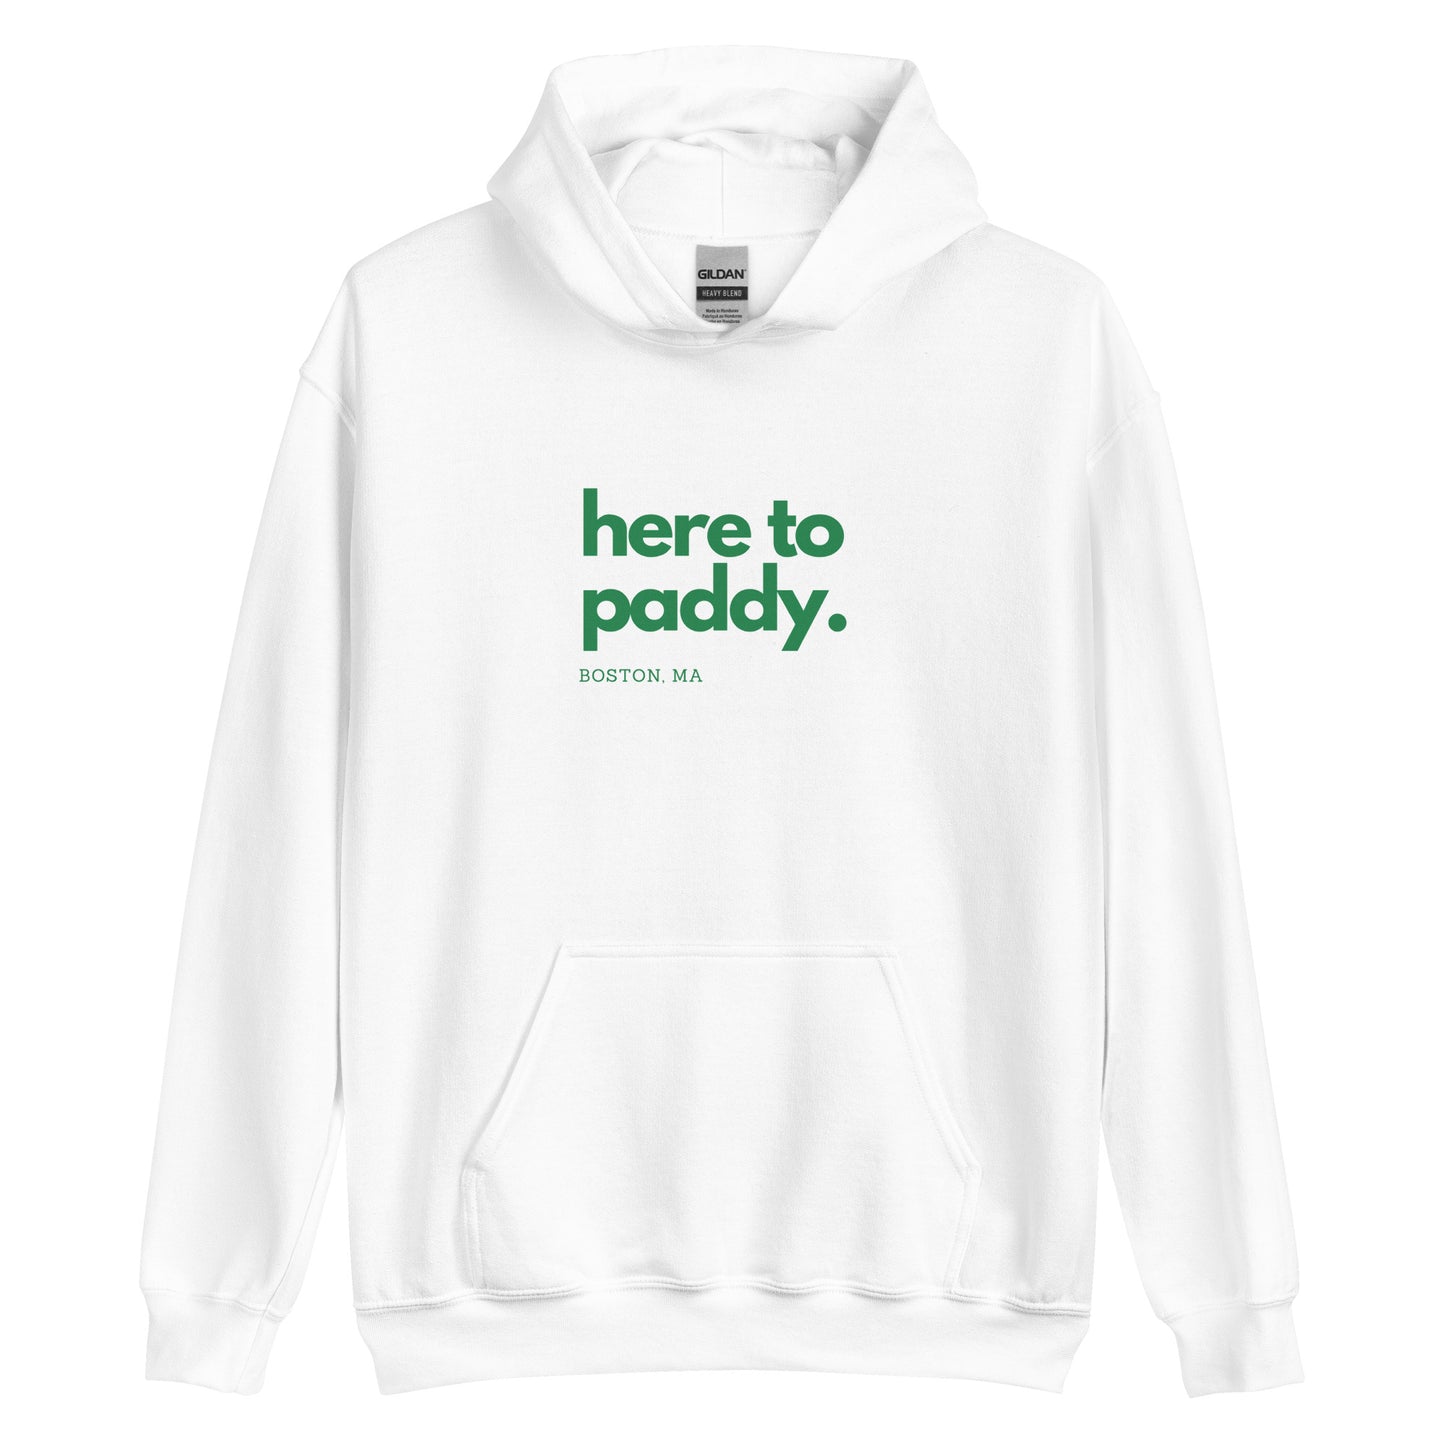 Here to paddy Hoodie